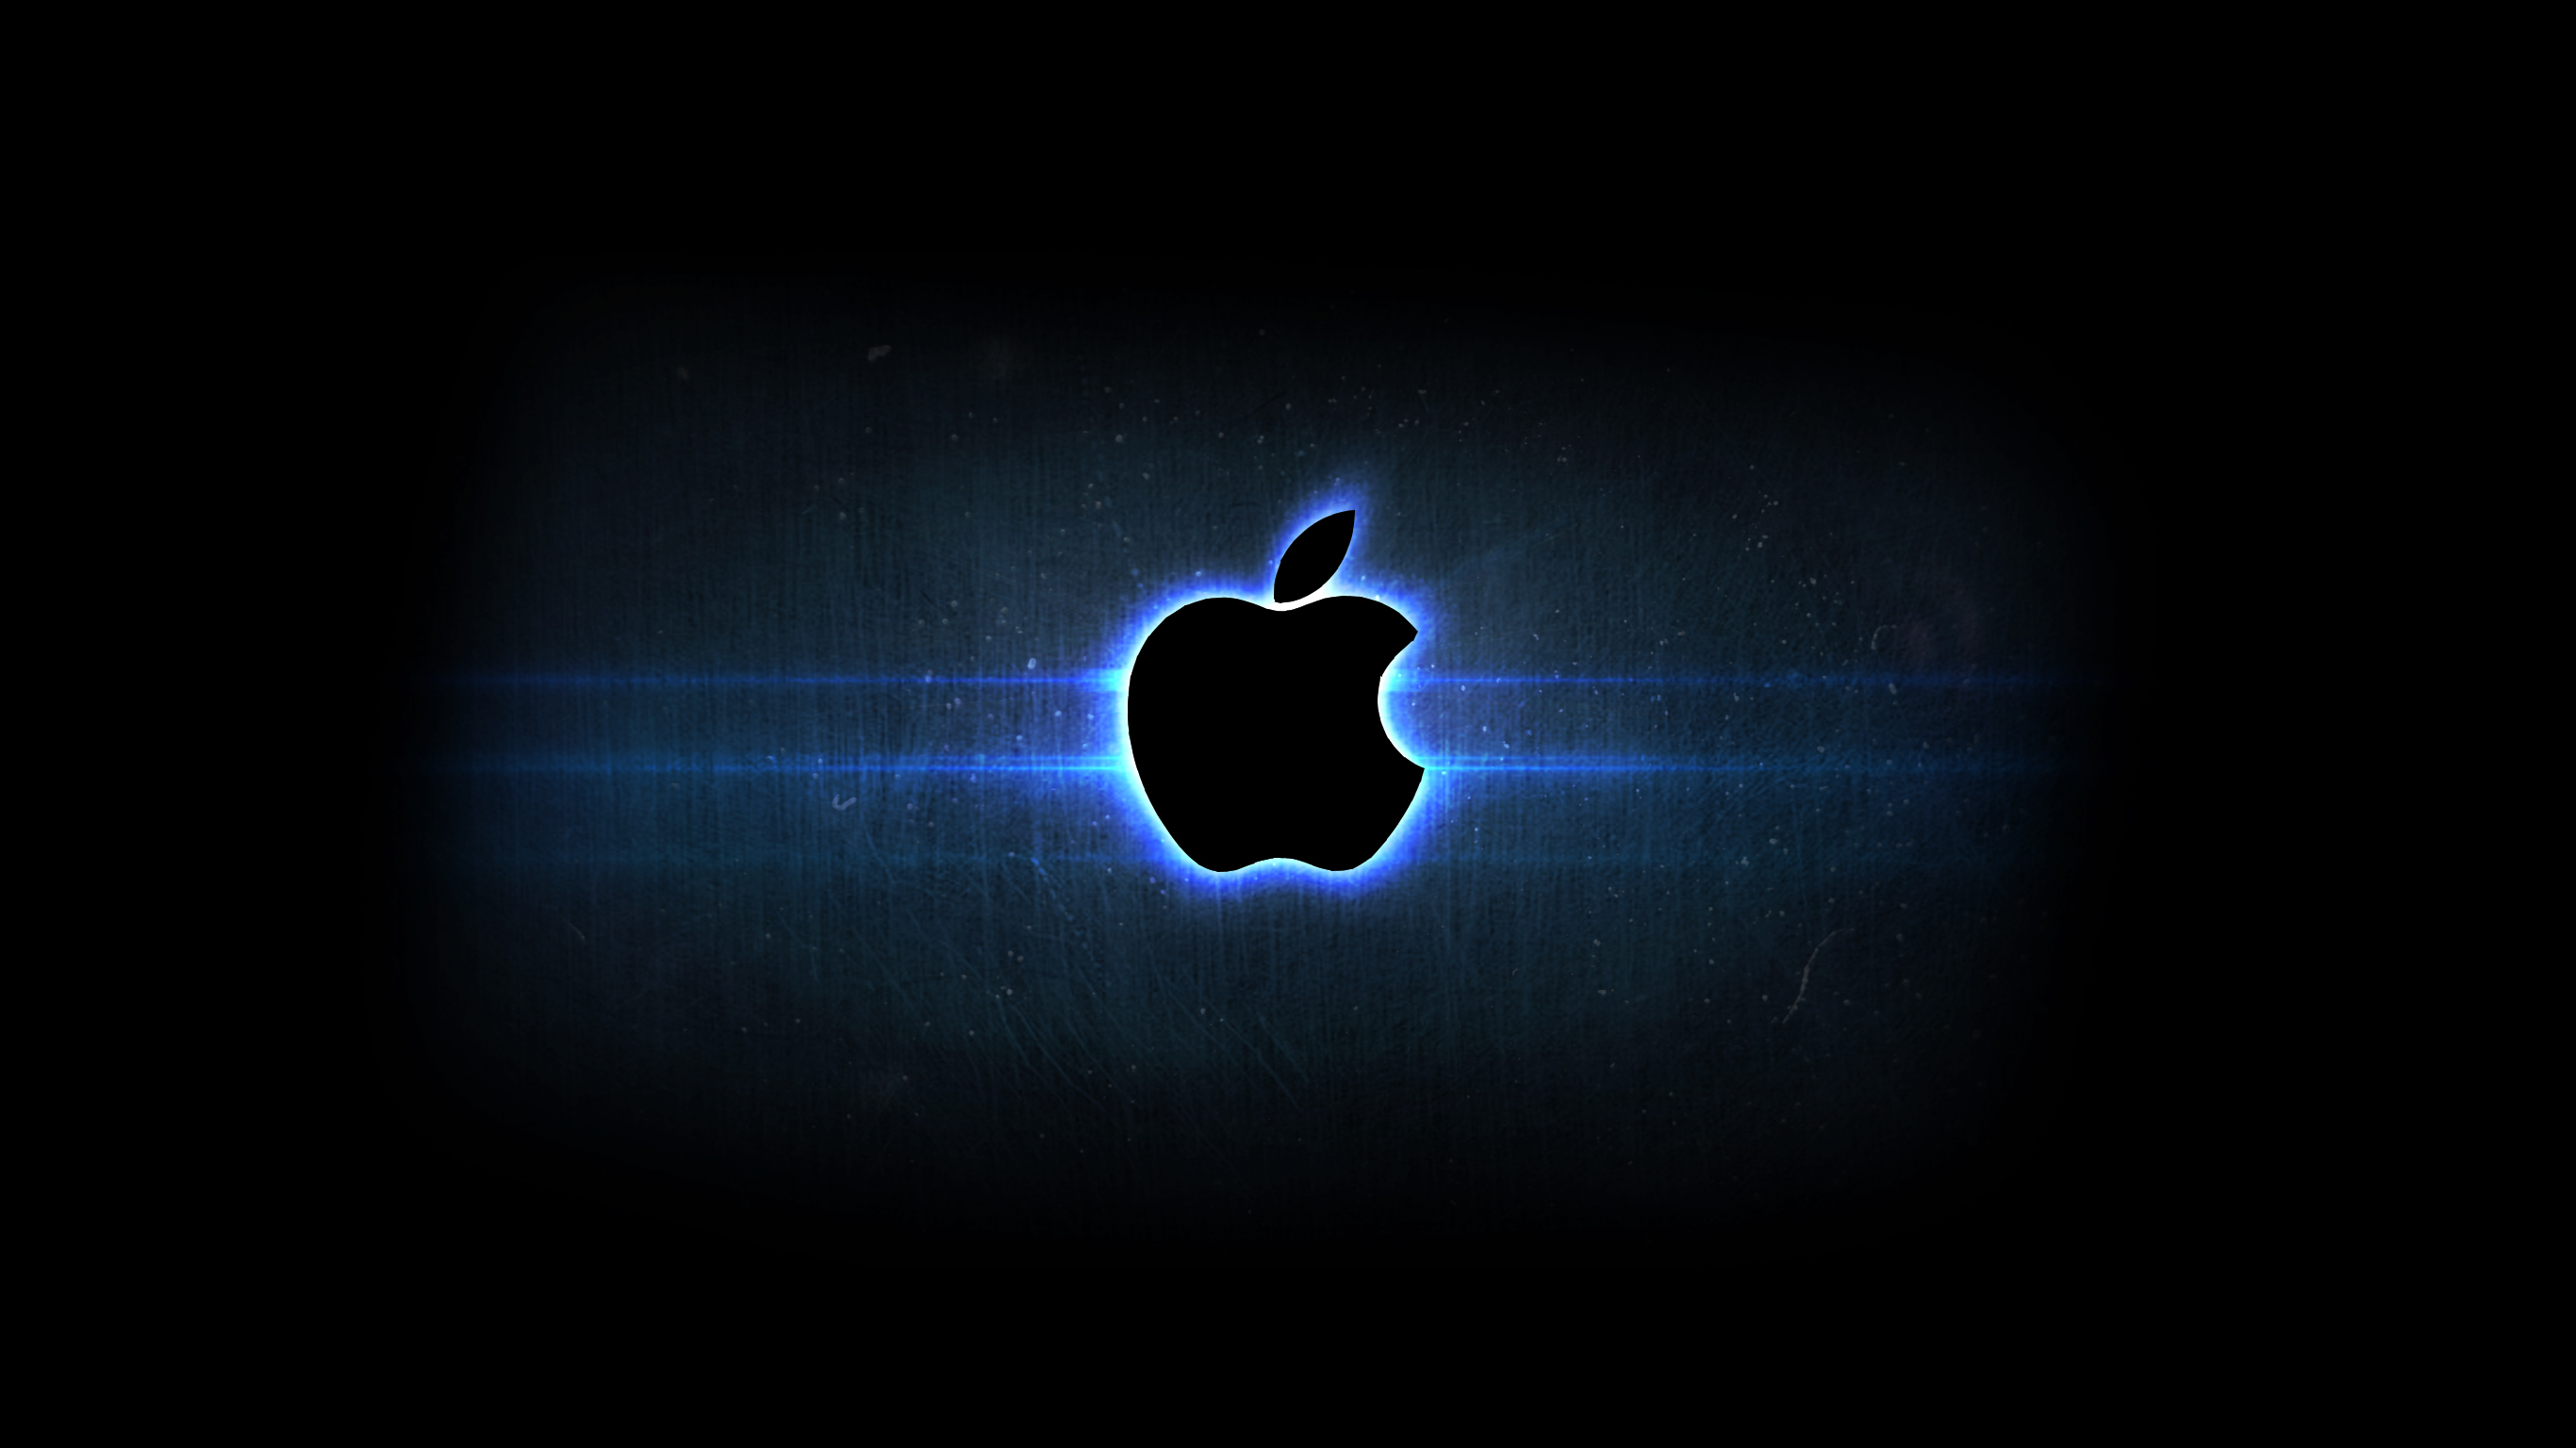 Apple WallpaperBackground by TimSaunders on